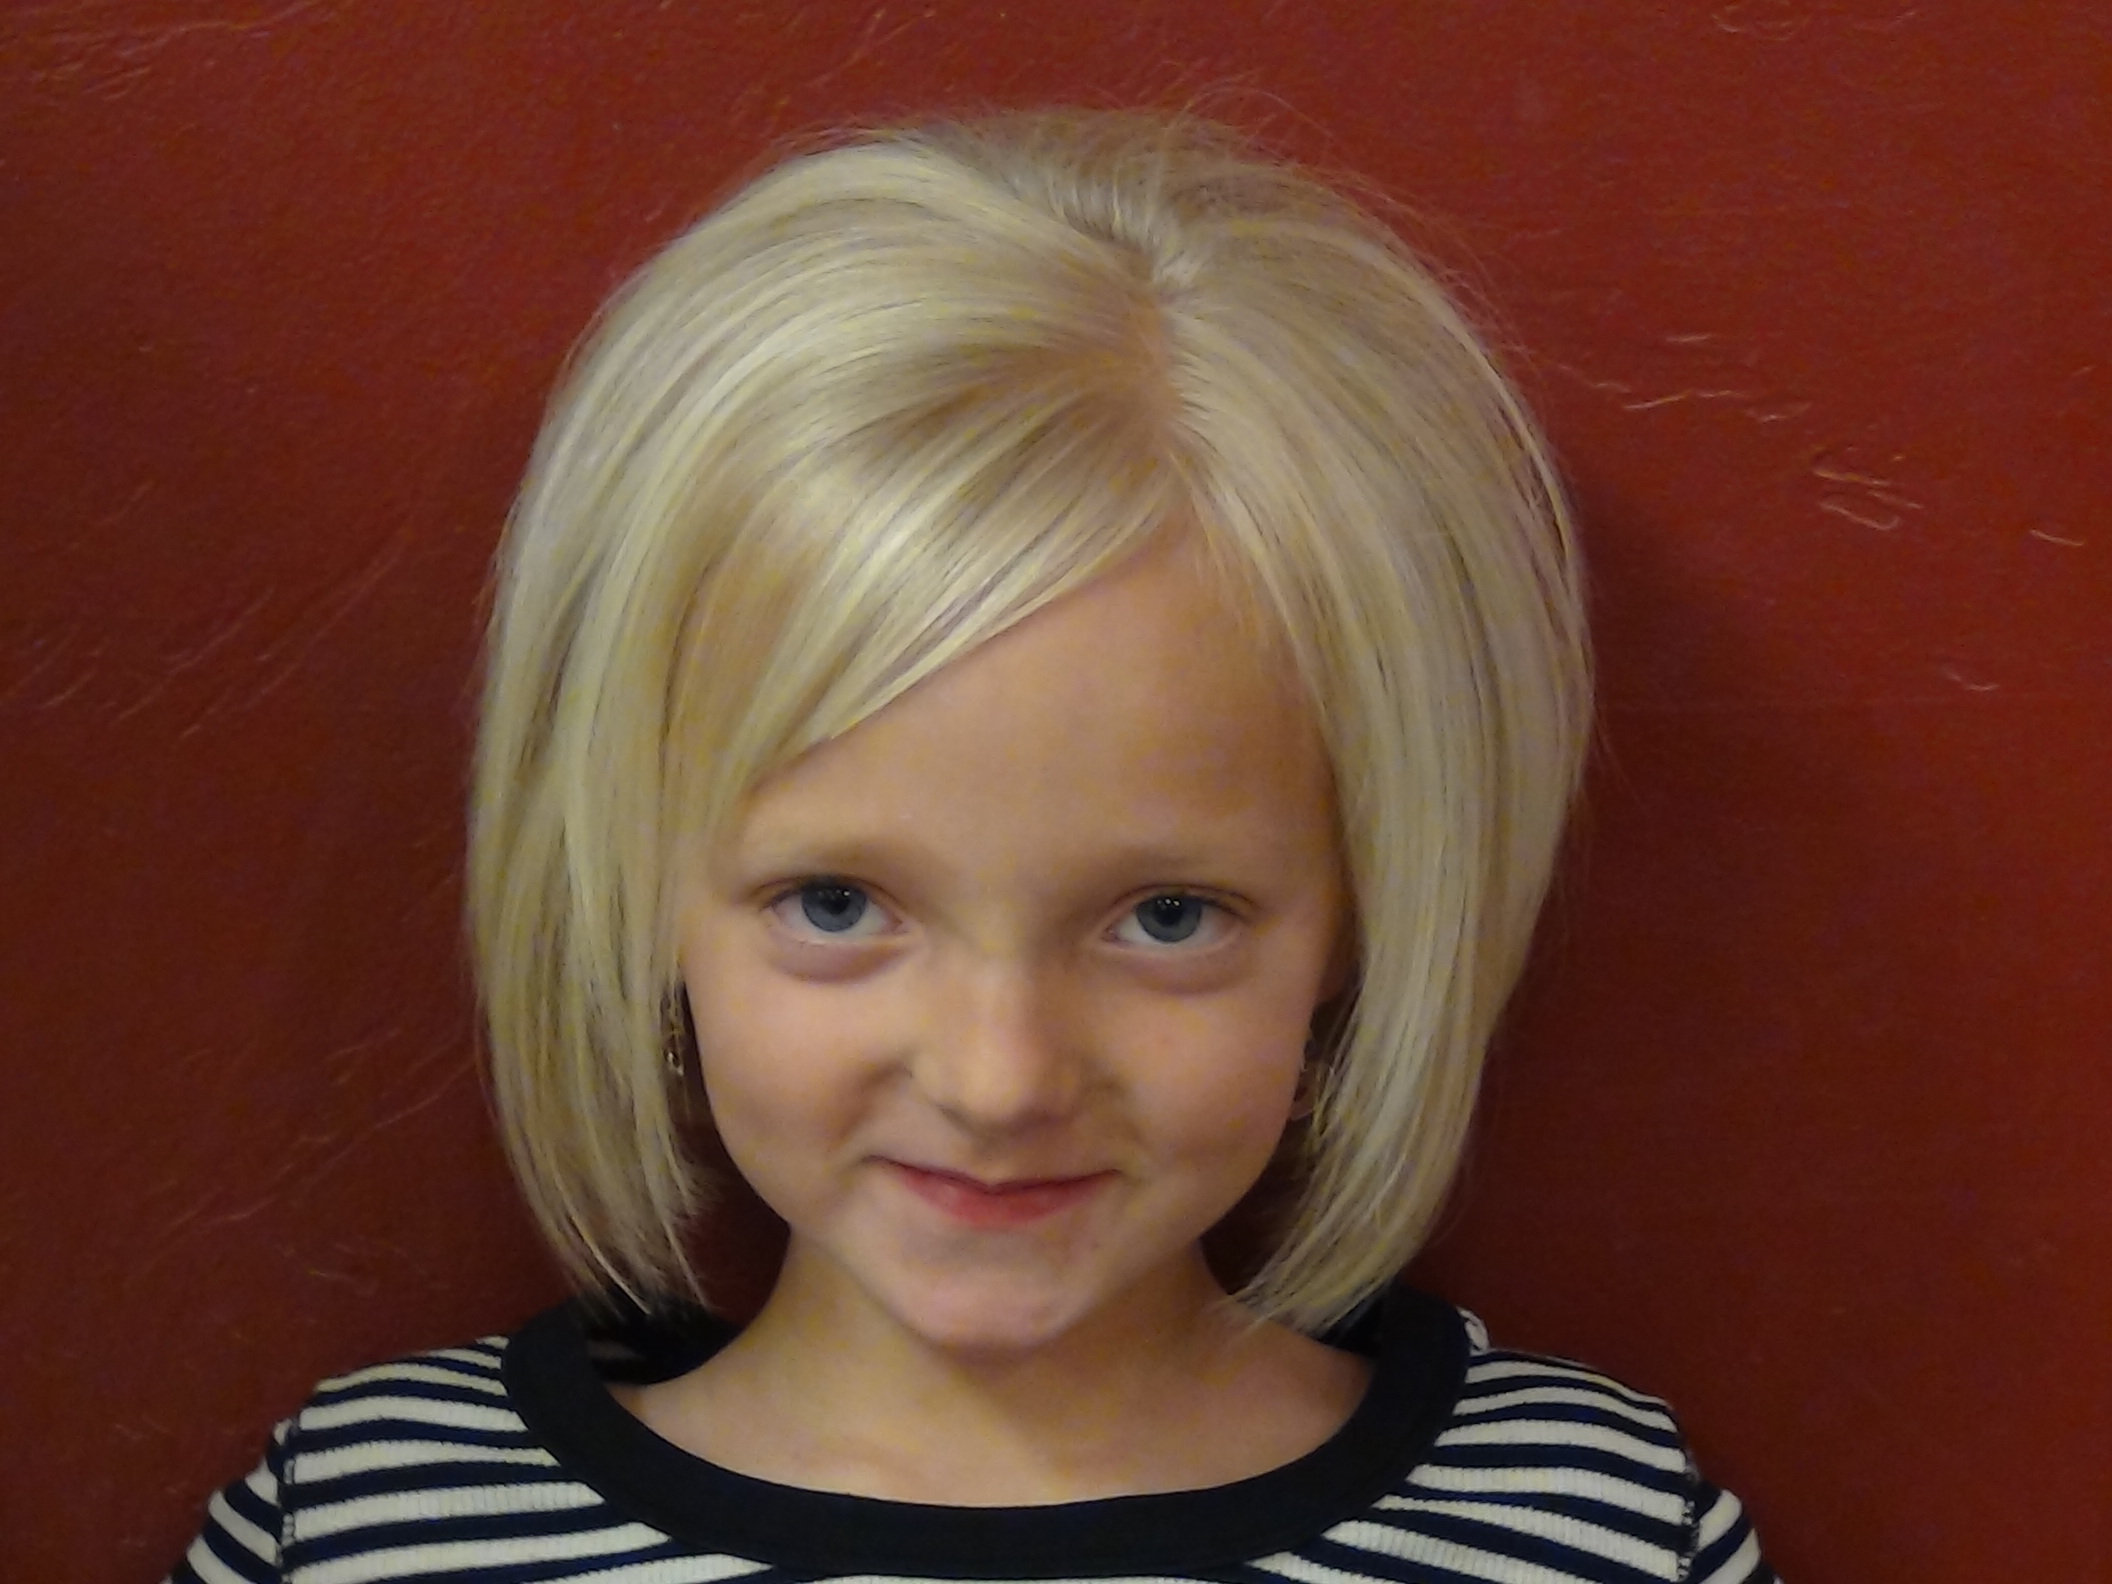 Cut Short Style into Little Girls Hair and Style | Boys and Girls Hair ...